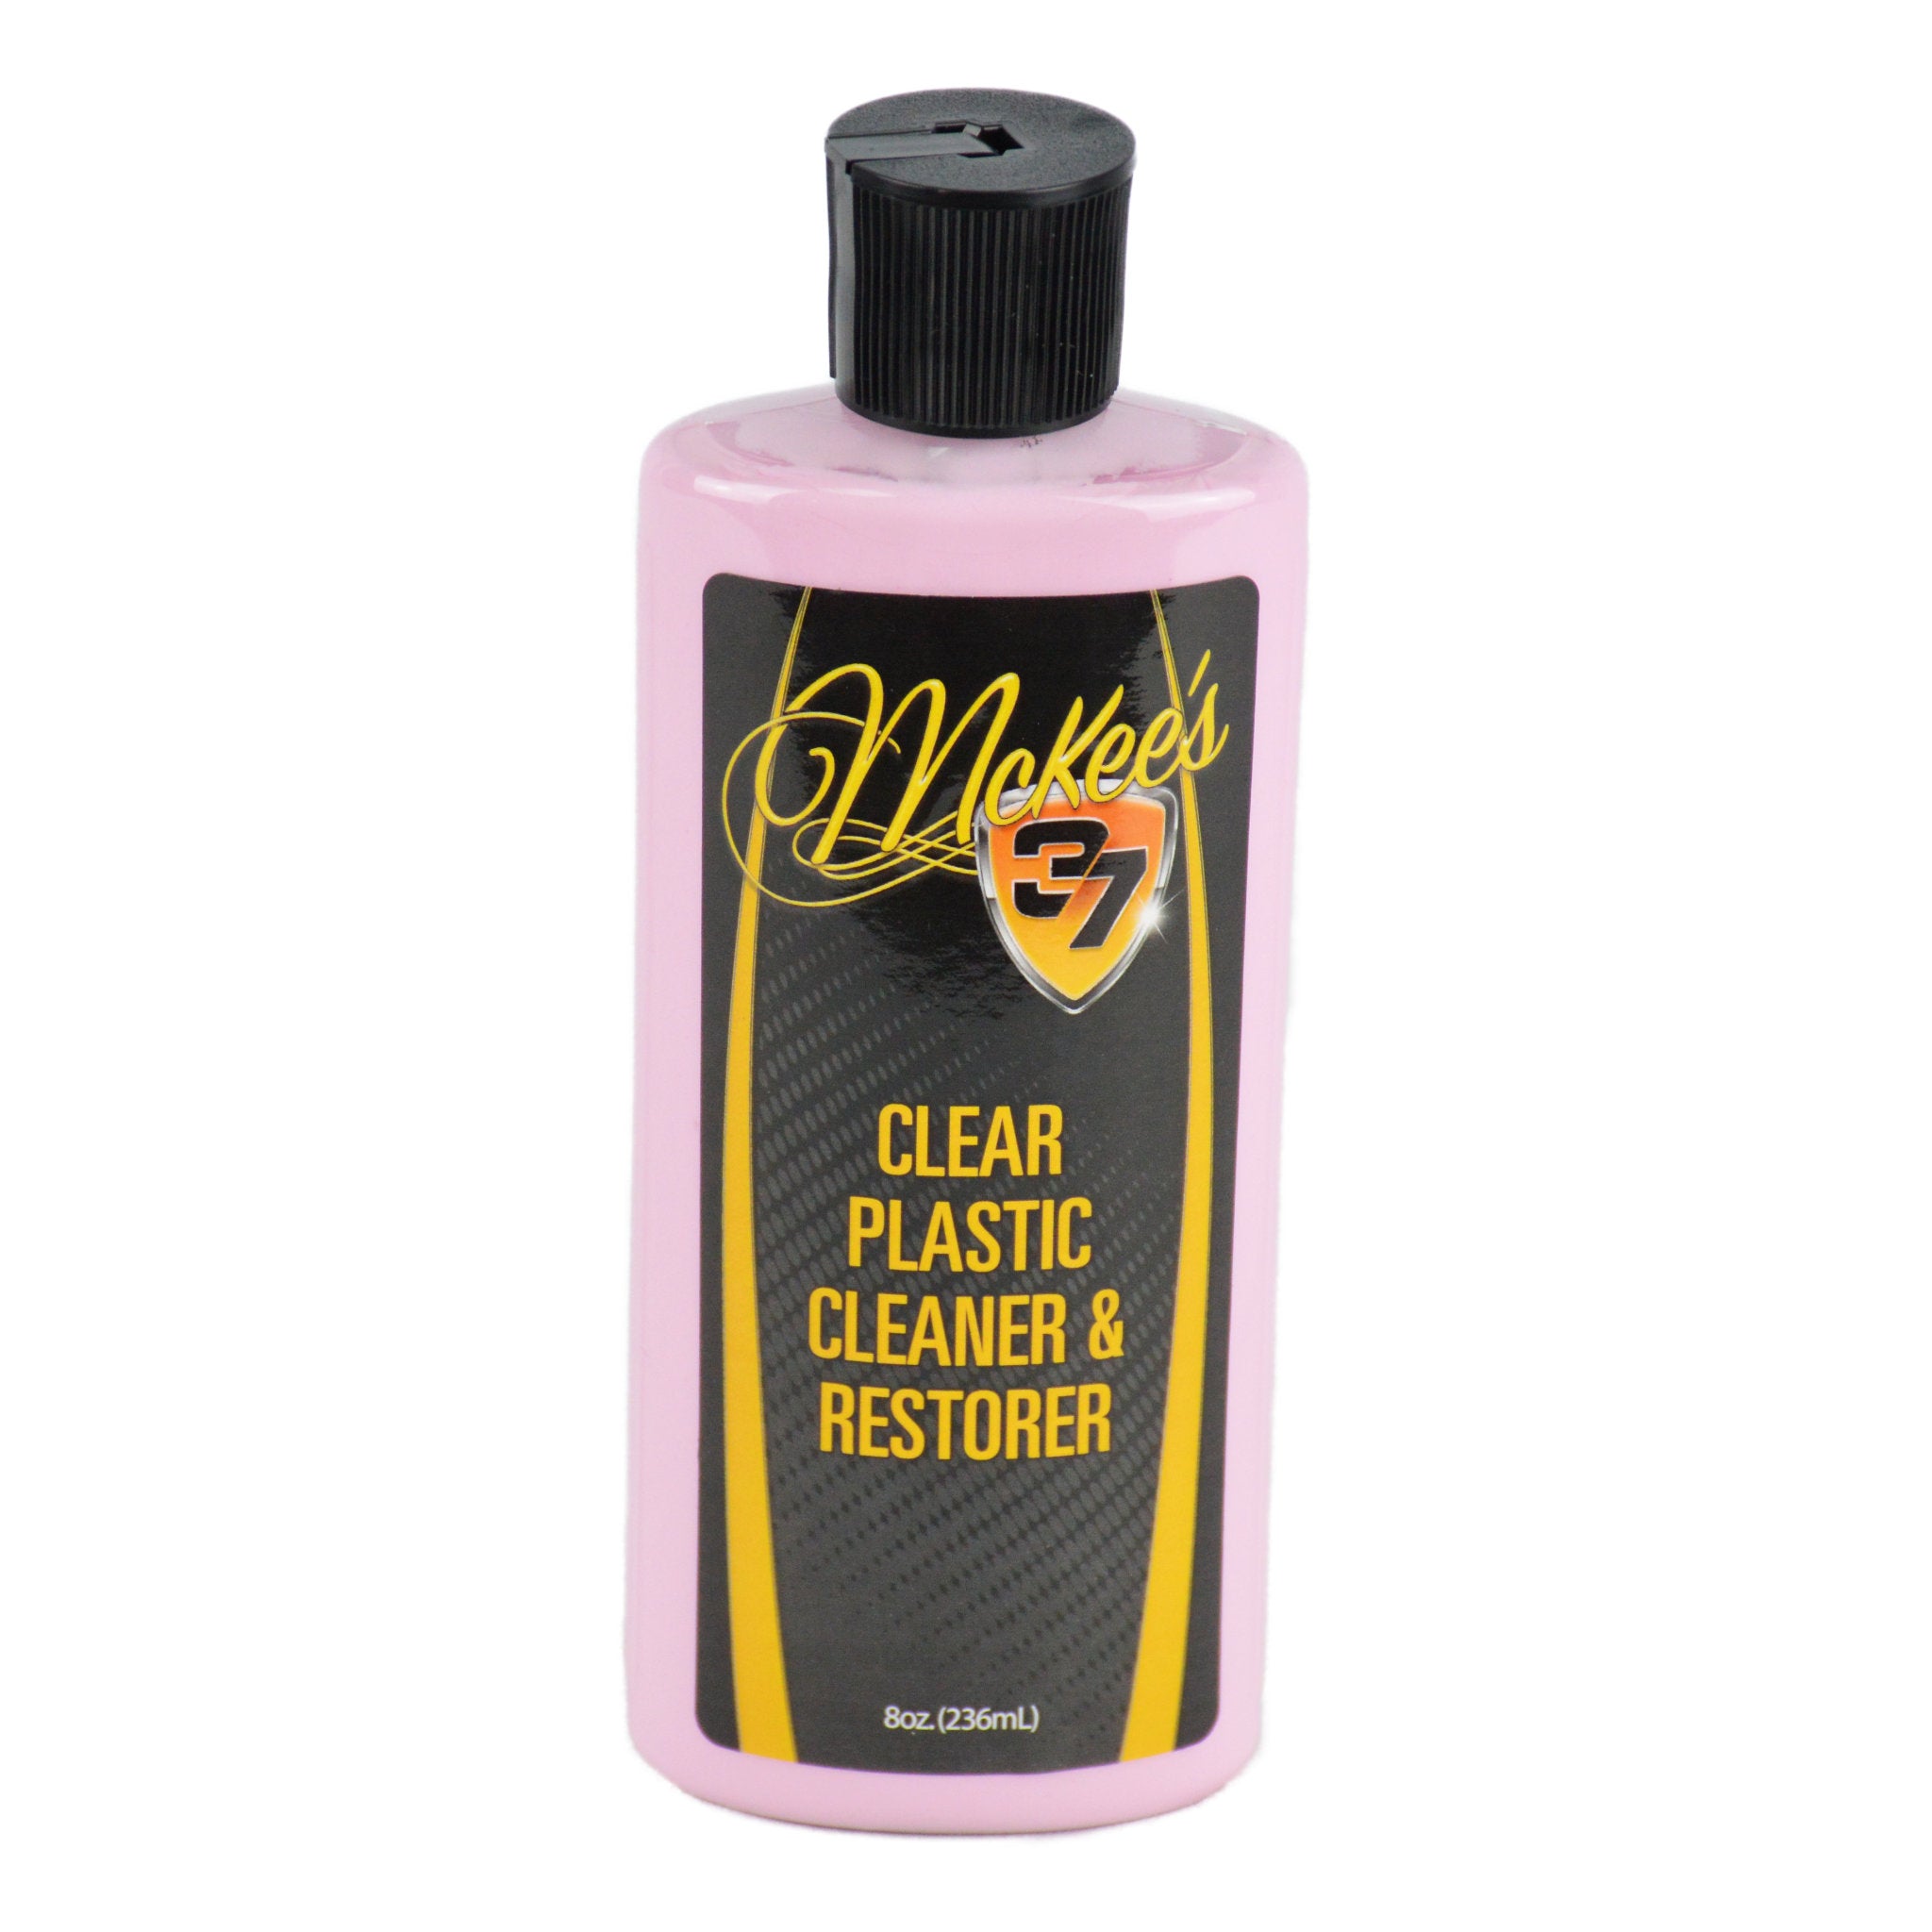 How To Restore Clear Vinyl & Plastic Windows (Convertible Tops) by McKee's  37 